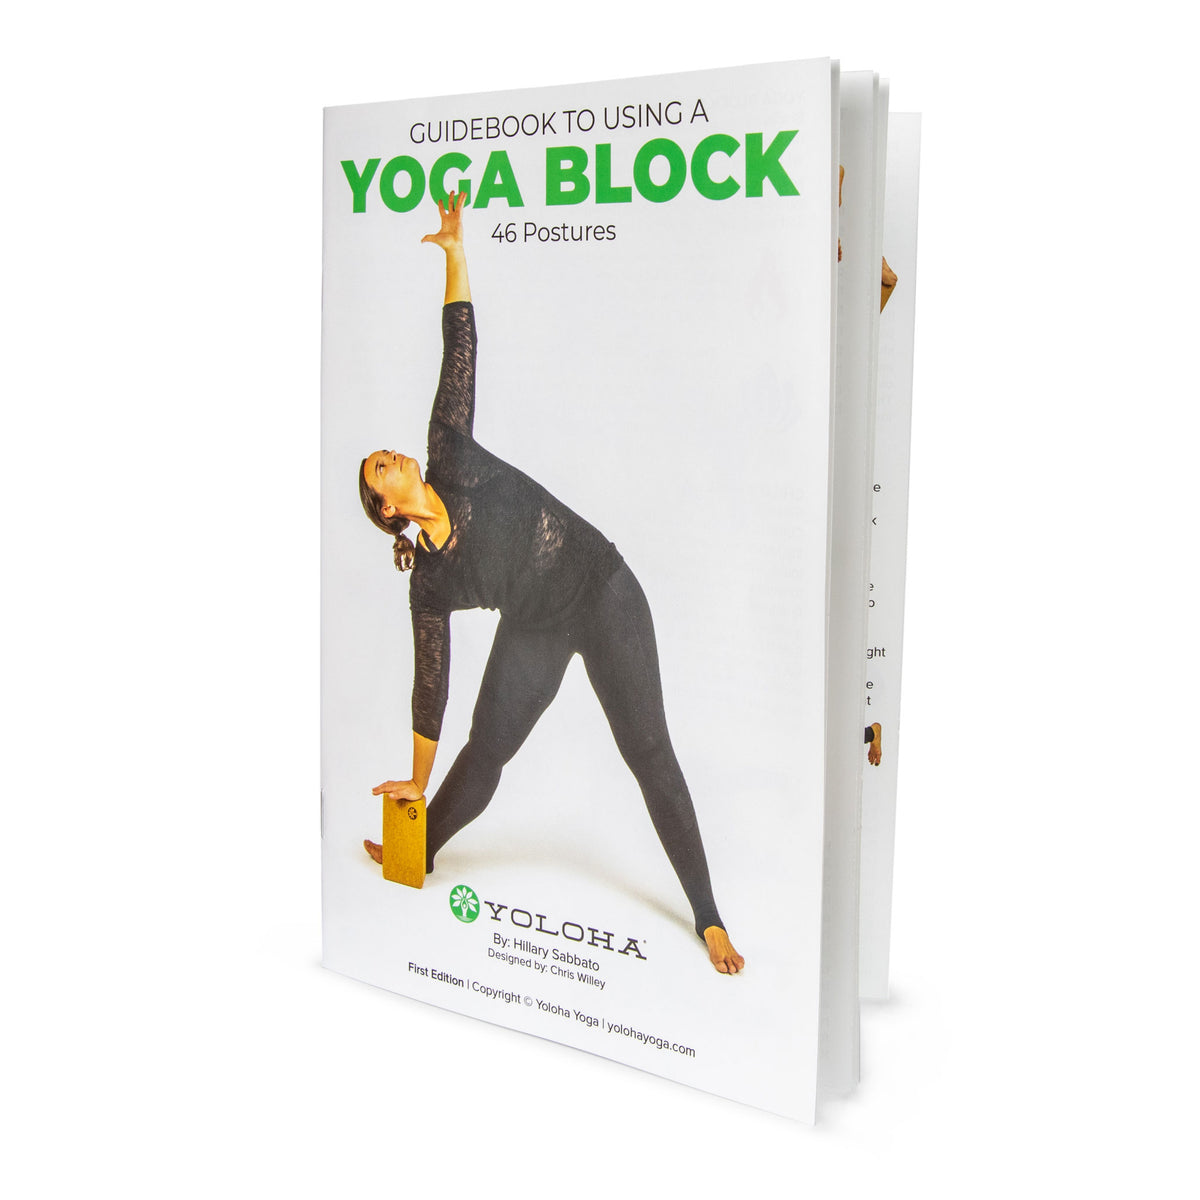 How important is the correct Alignment in Yoga Practice - Issuu